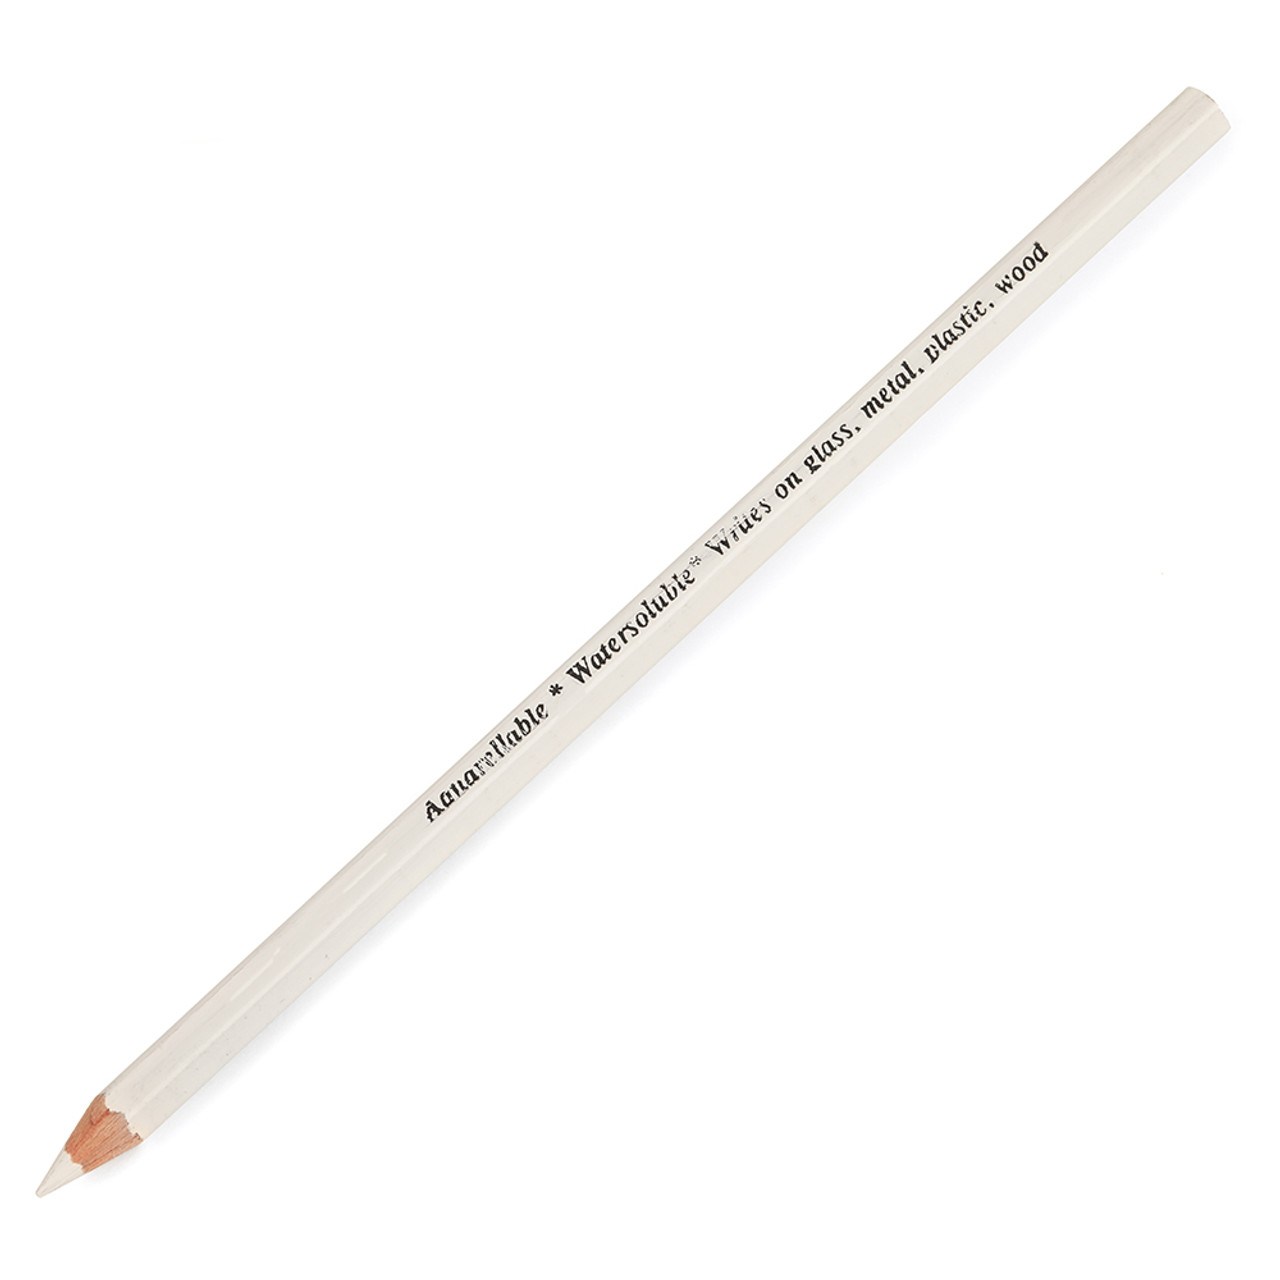 Scribe-All® Water Soluble White Marking Pencil - Sailrite